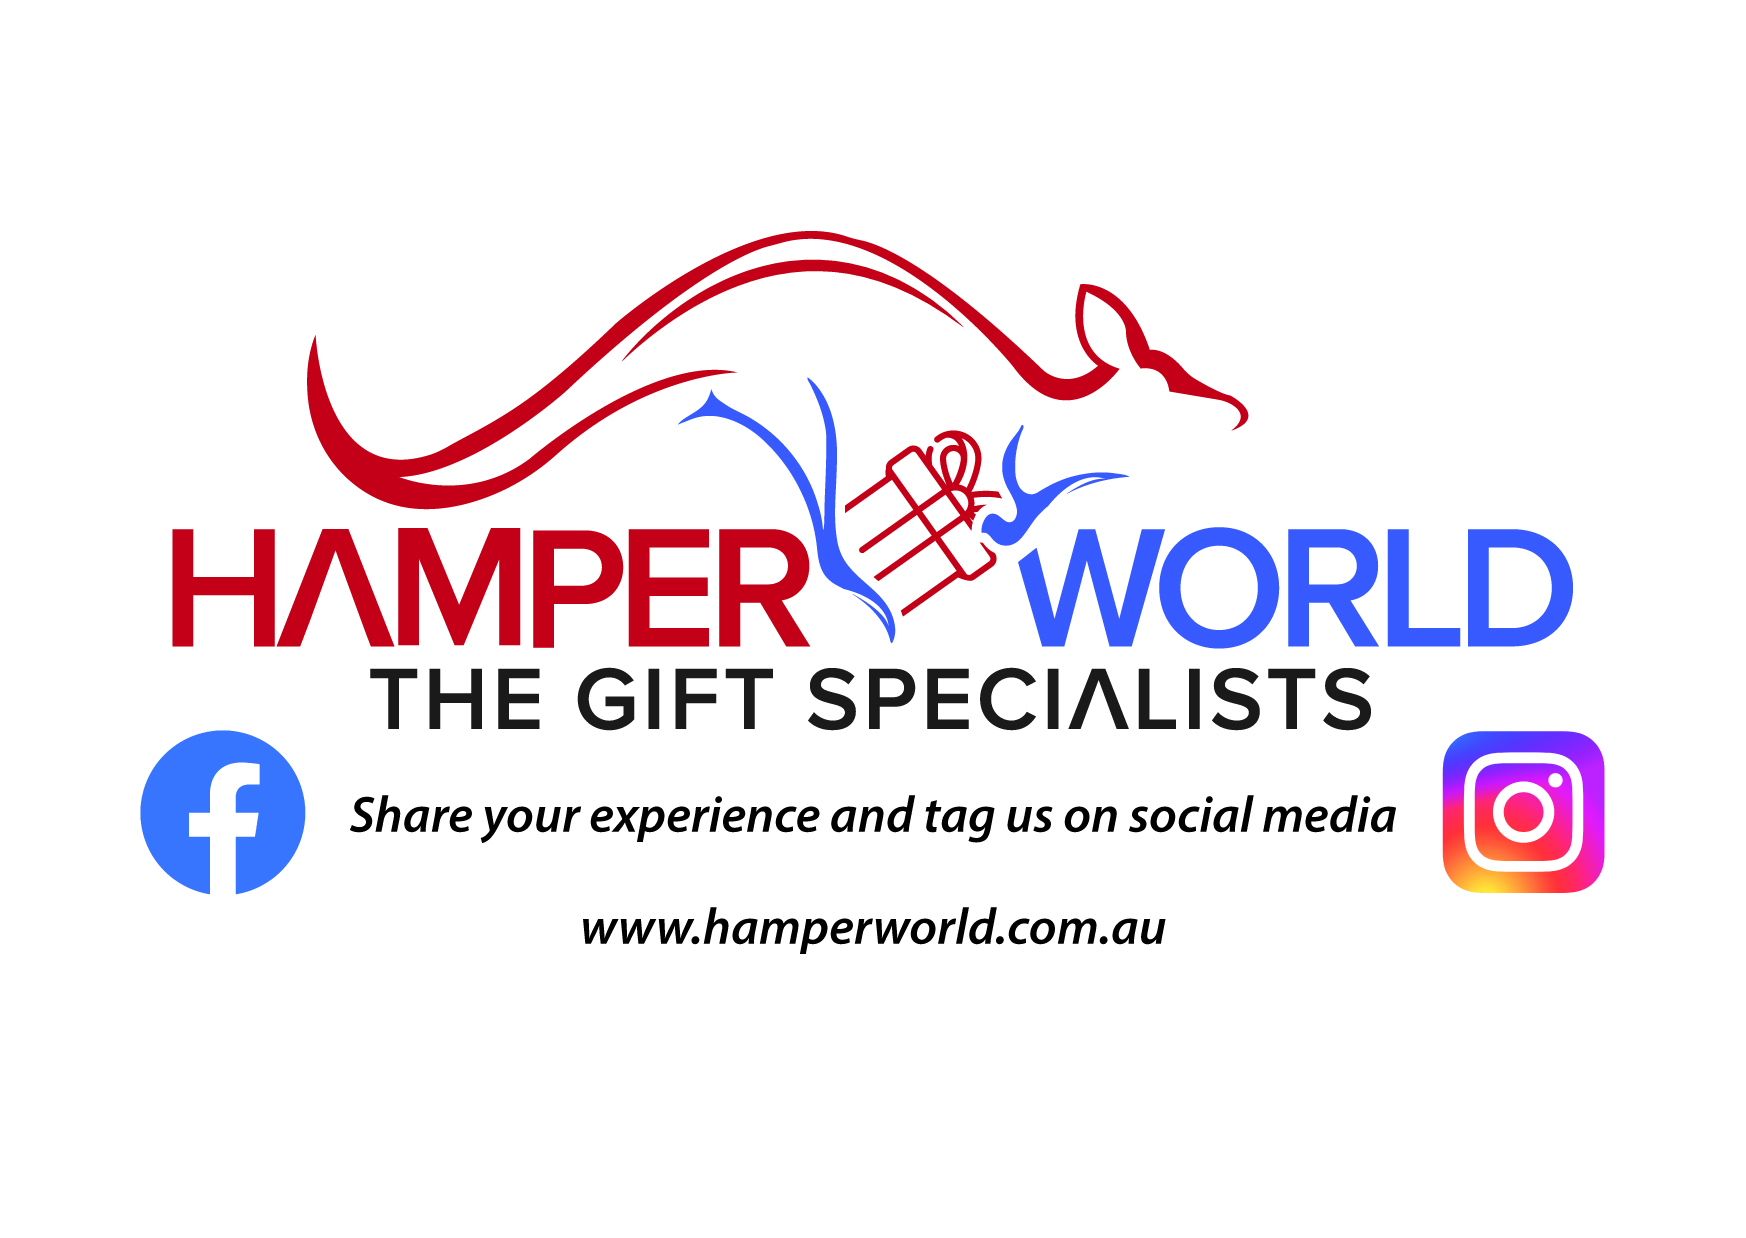 Hamper World, the gift specialists